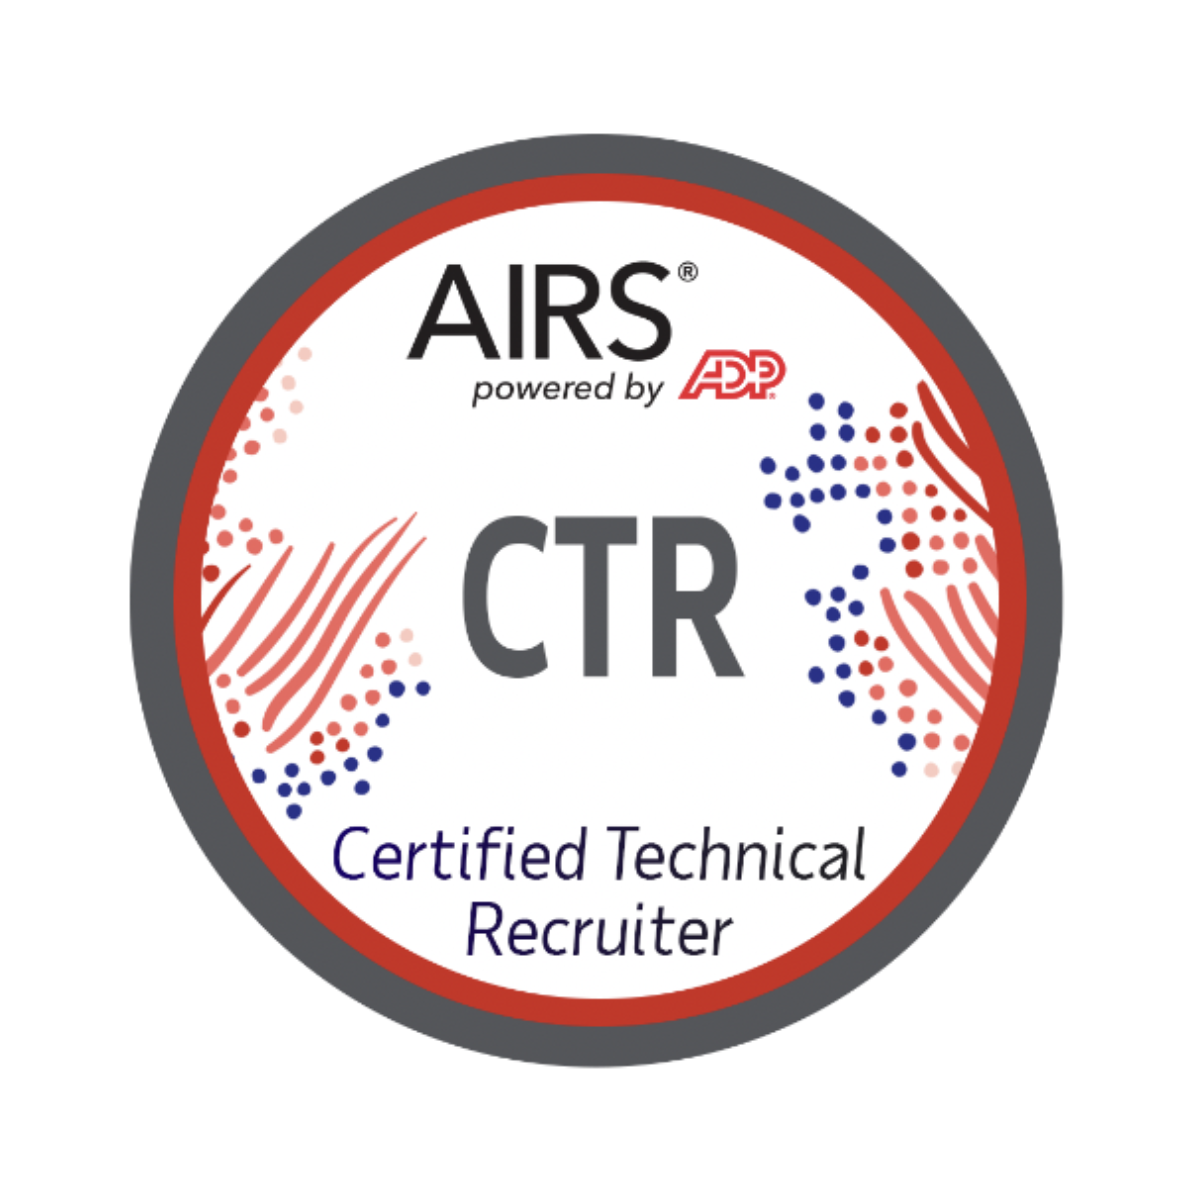 AIRS Certified Technical Recruiter